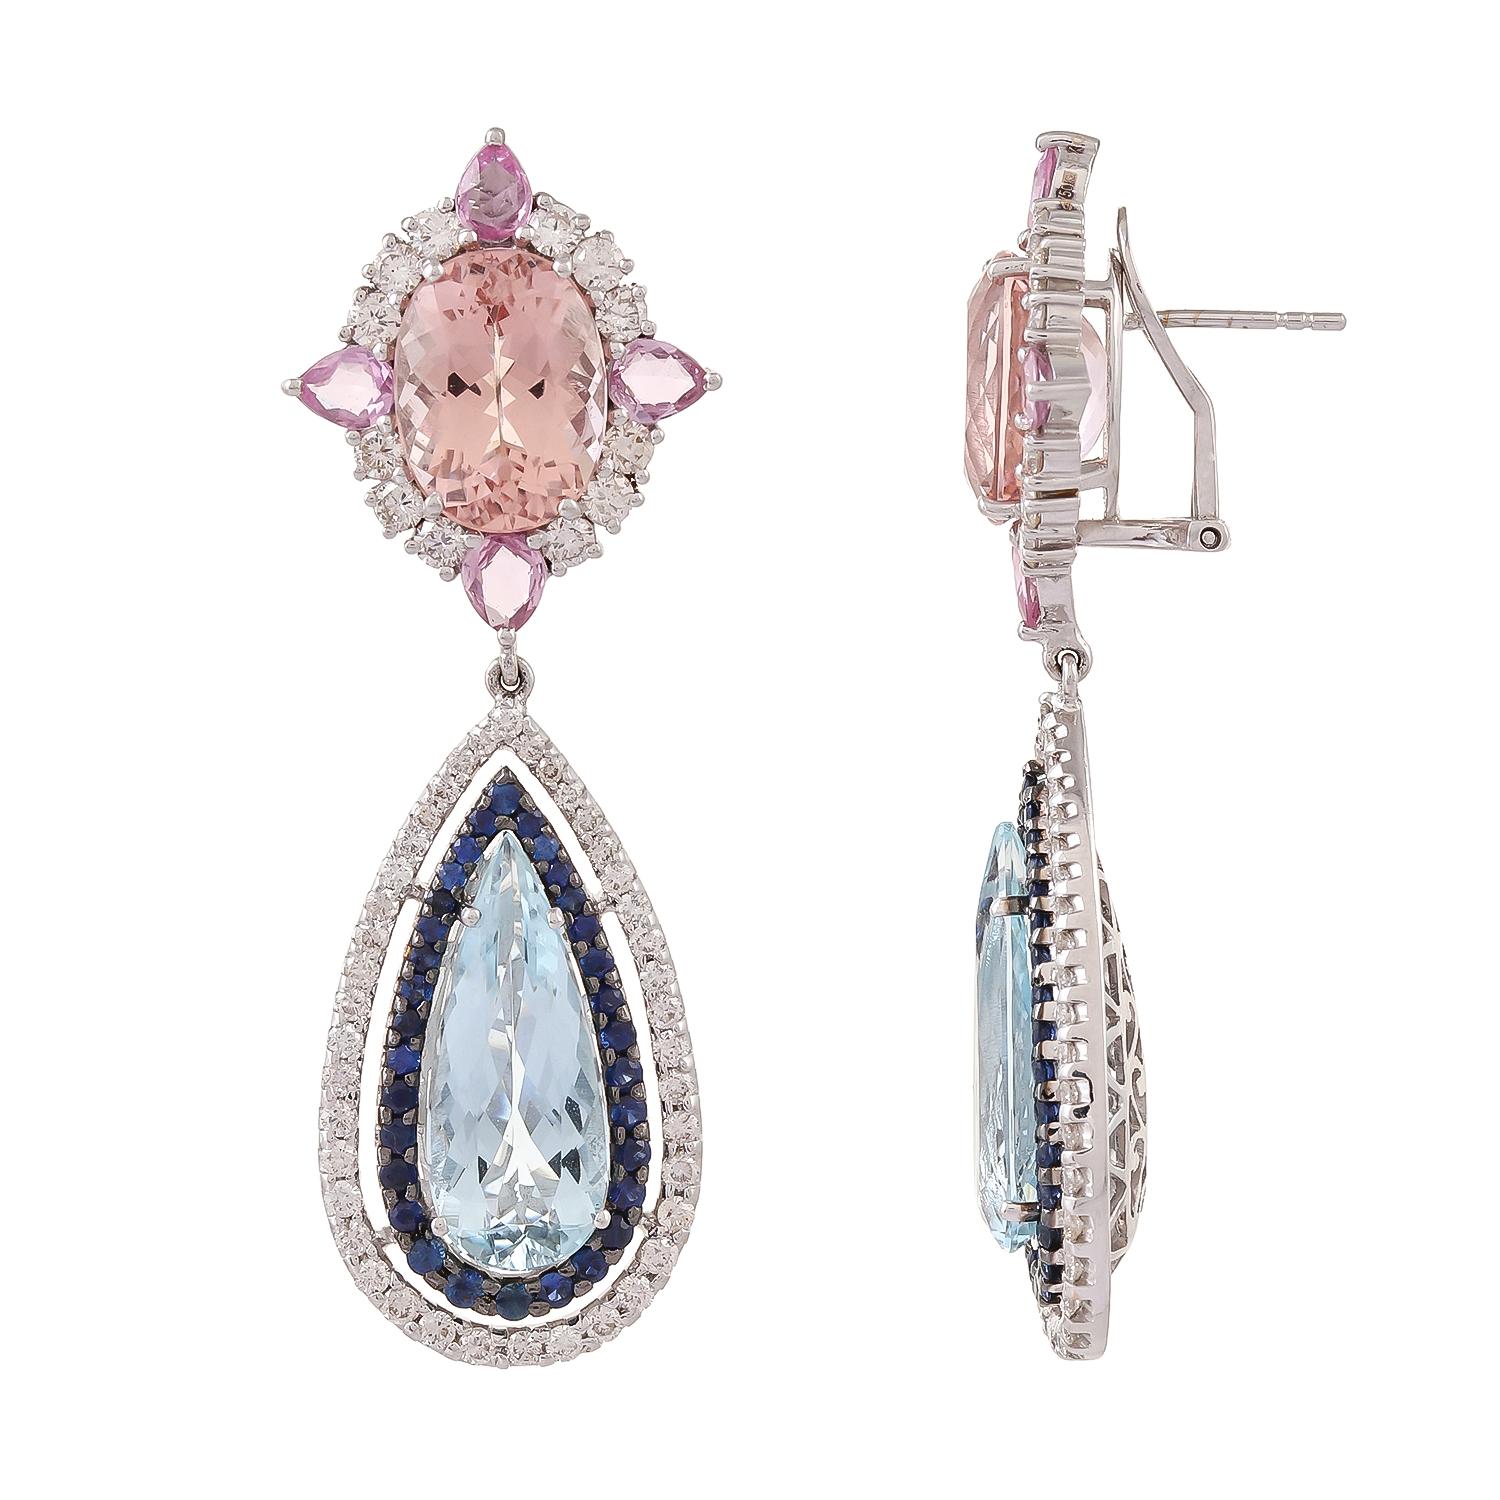 These stunning ear pendants are meant for the red carpet. Gorgeous 11.79ct morganites are mixed with generous size 11.91ct cut aquamarine teardrops. The Brazilian blues and the pink sapphire weighing approximately 1.62 carats and 2.09 carats